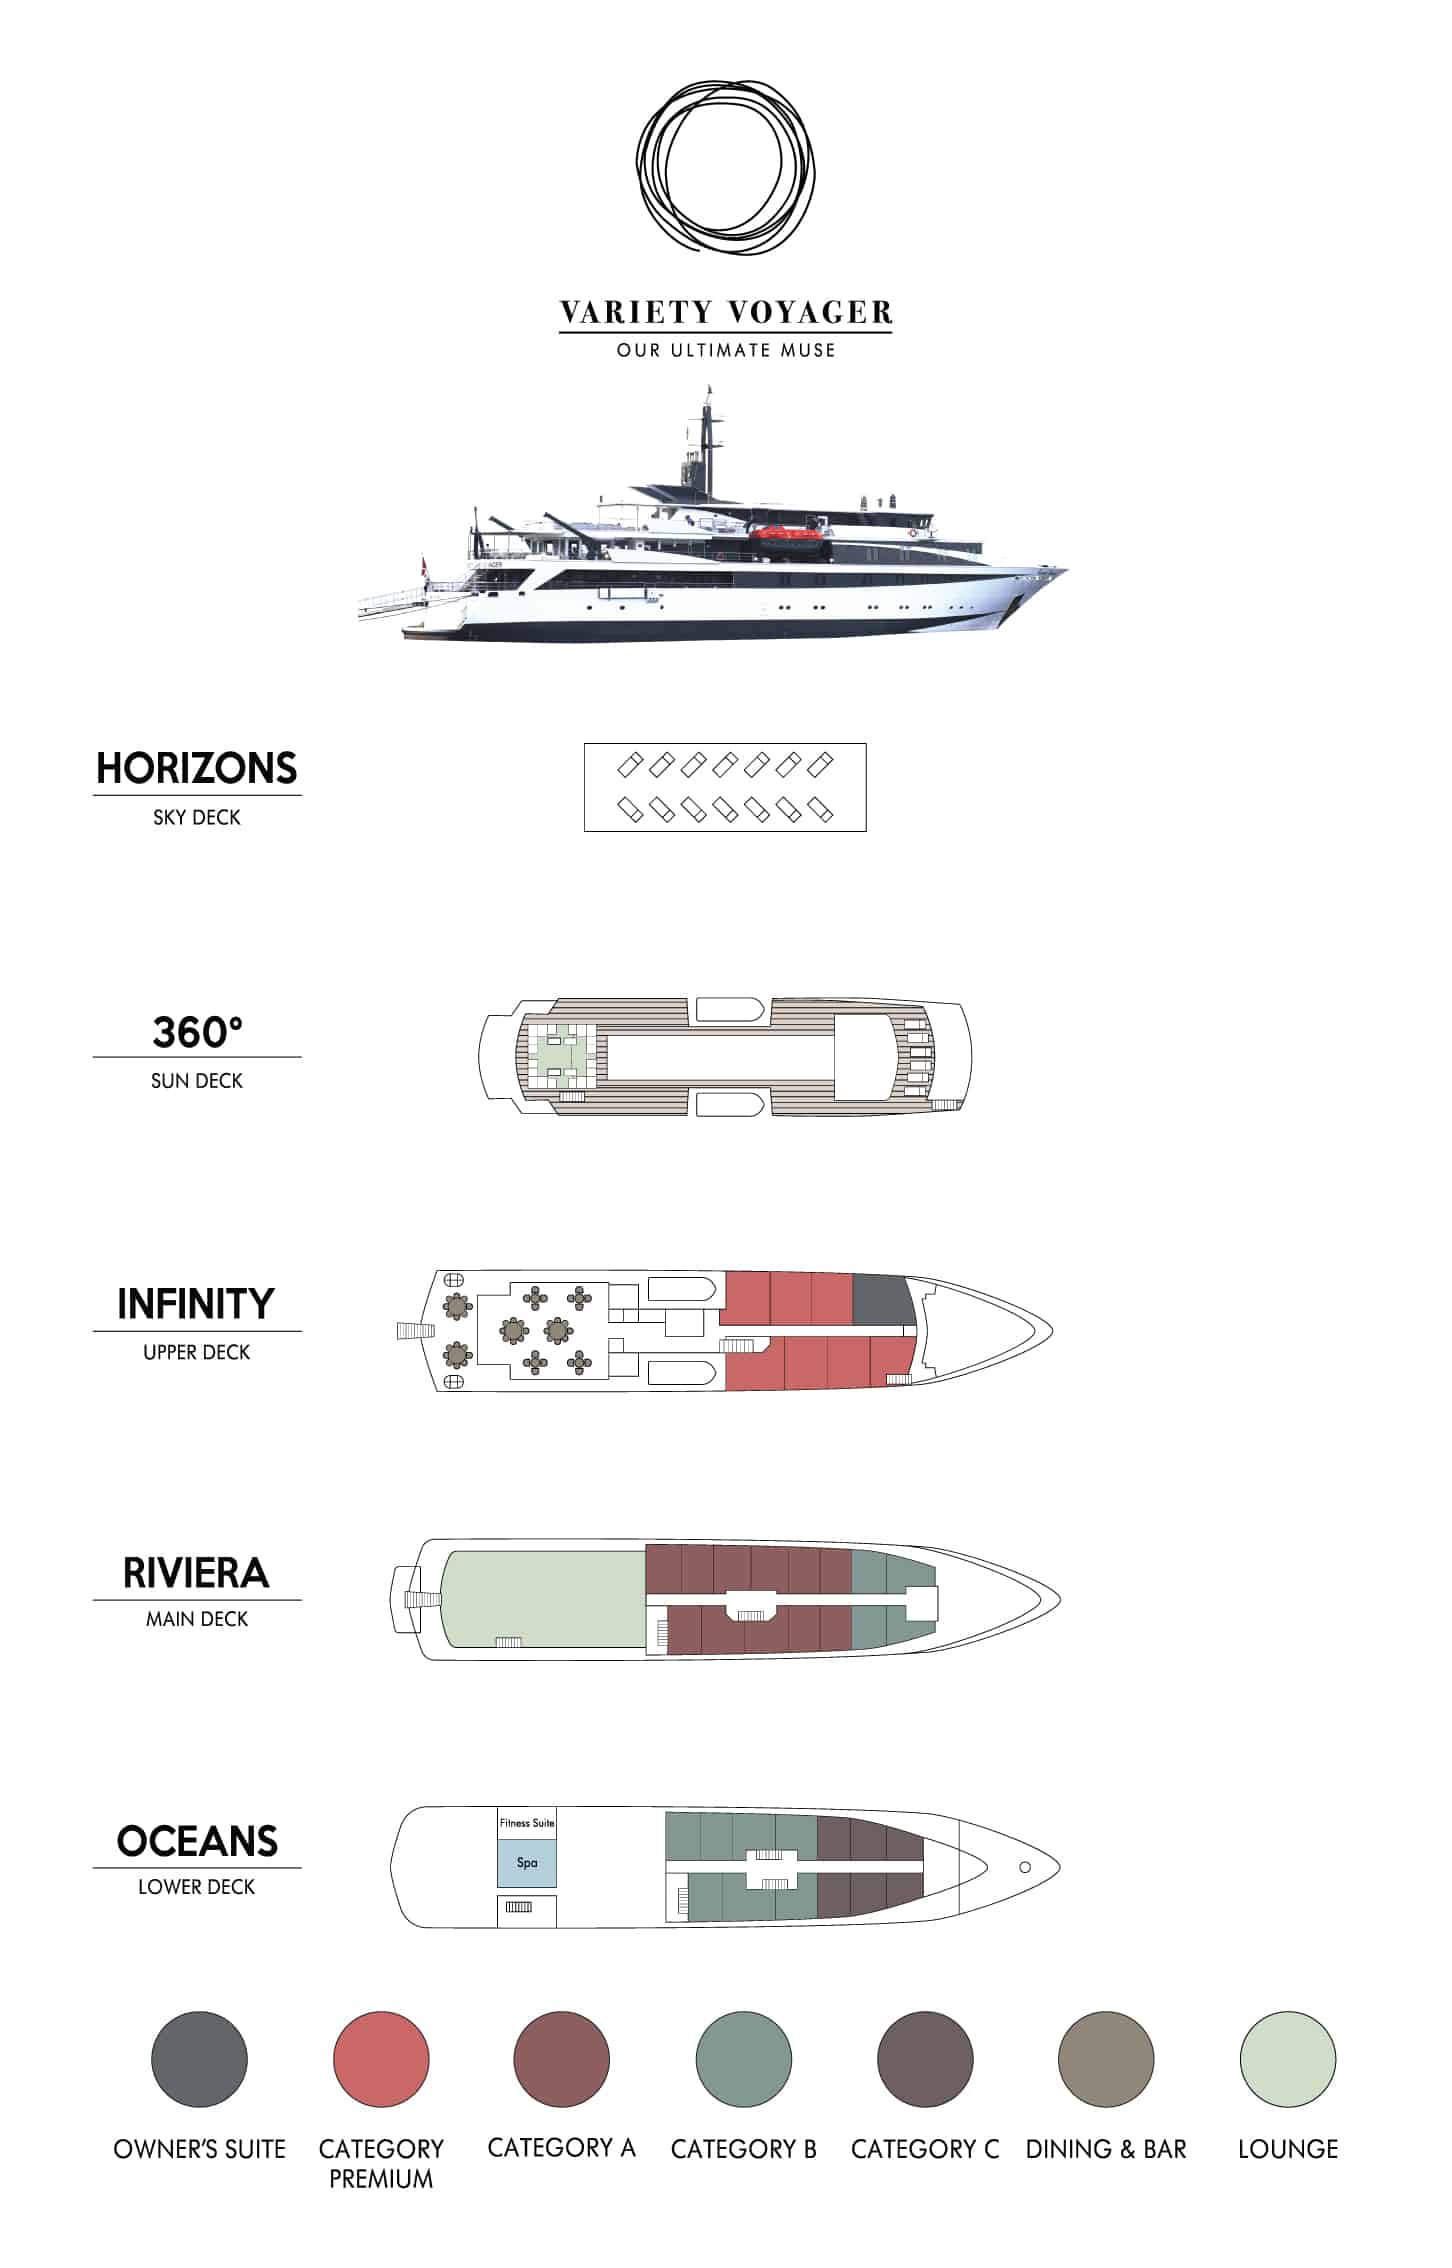 Chart showing the Variety Voyager ship deck plan with 5 decks and a ship profile.